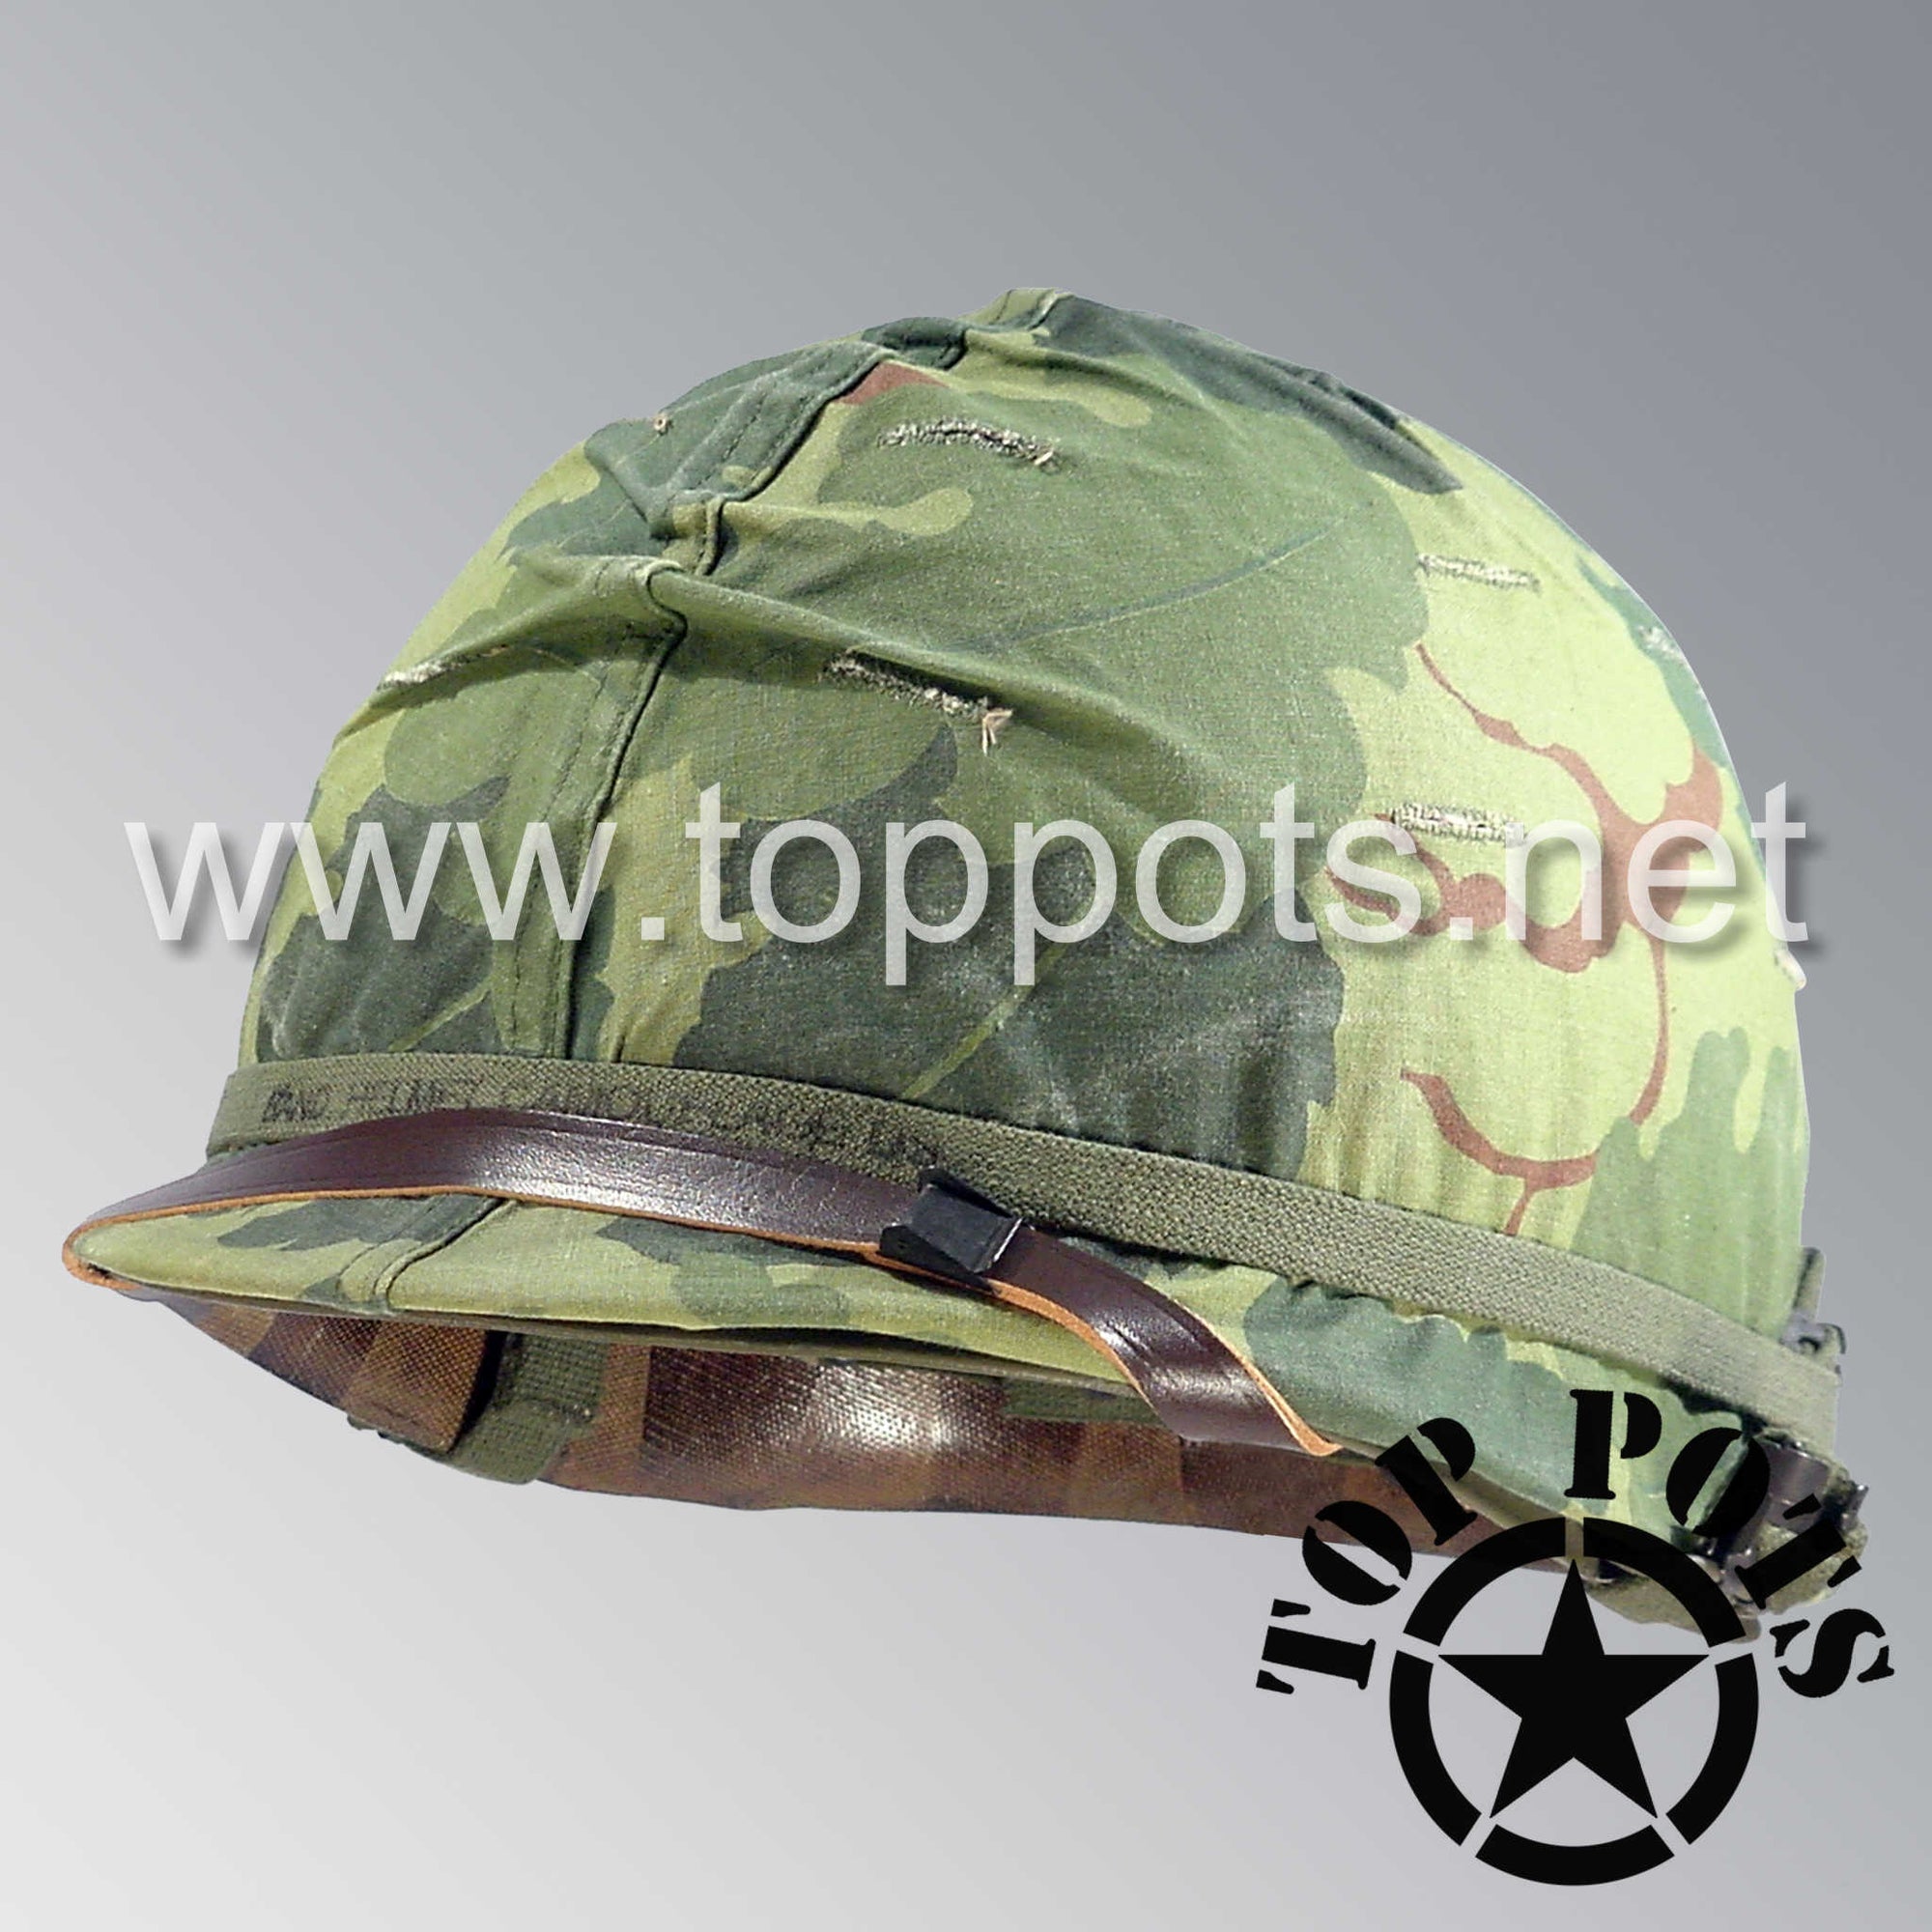 Vietnam War US Army Original M1 Infantry Helmet Swivel Bale Shell and P55 Liner with Mitchell Camouflage Cover